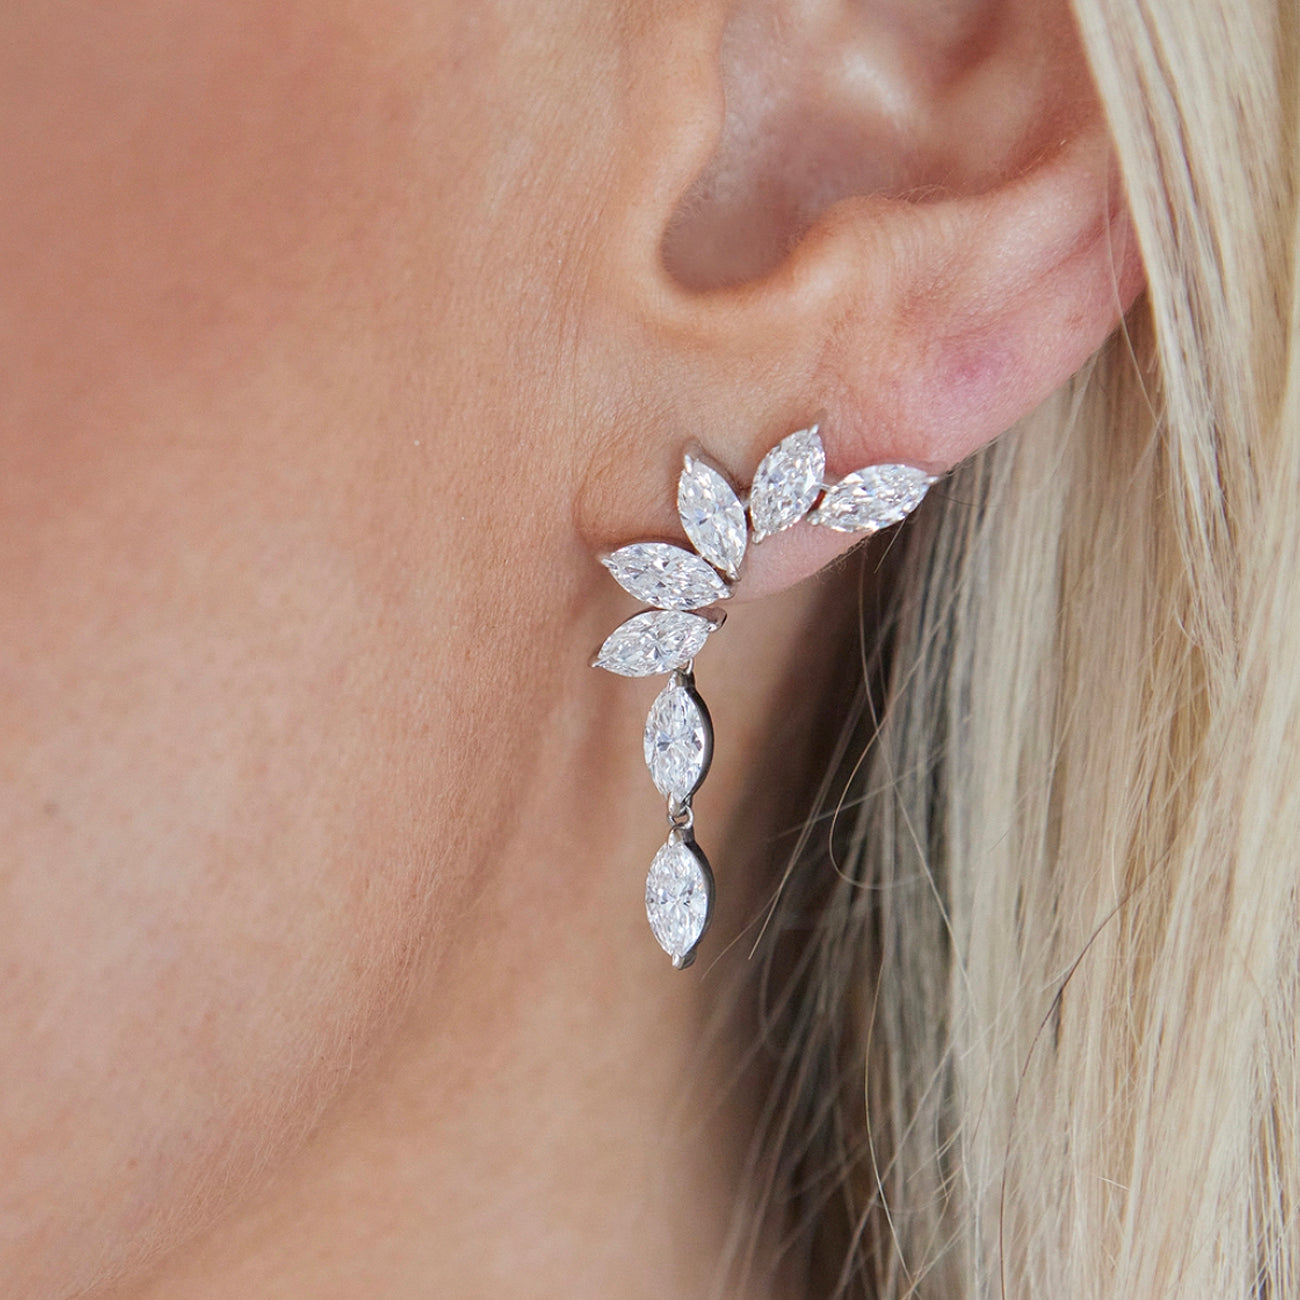 Climbing Ivy Waterfall Earrings in White Gold with Marquise Diamonds